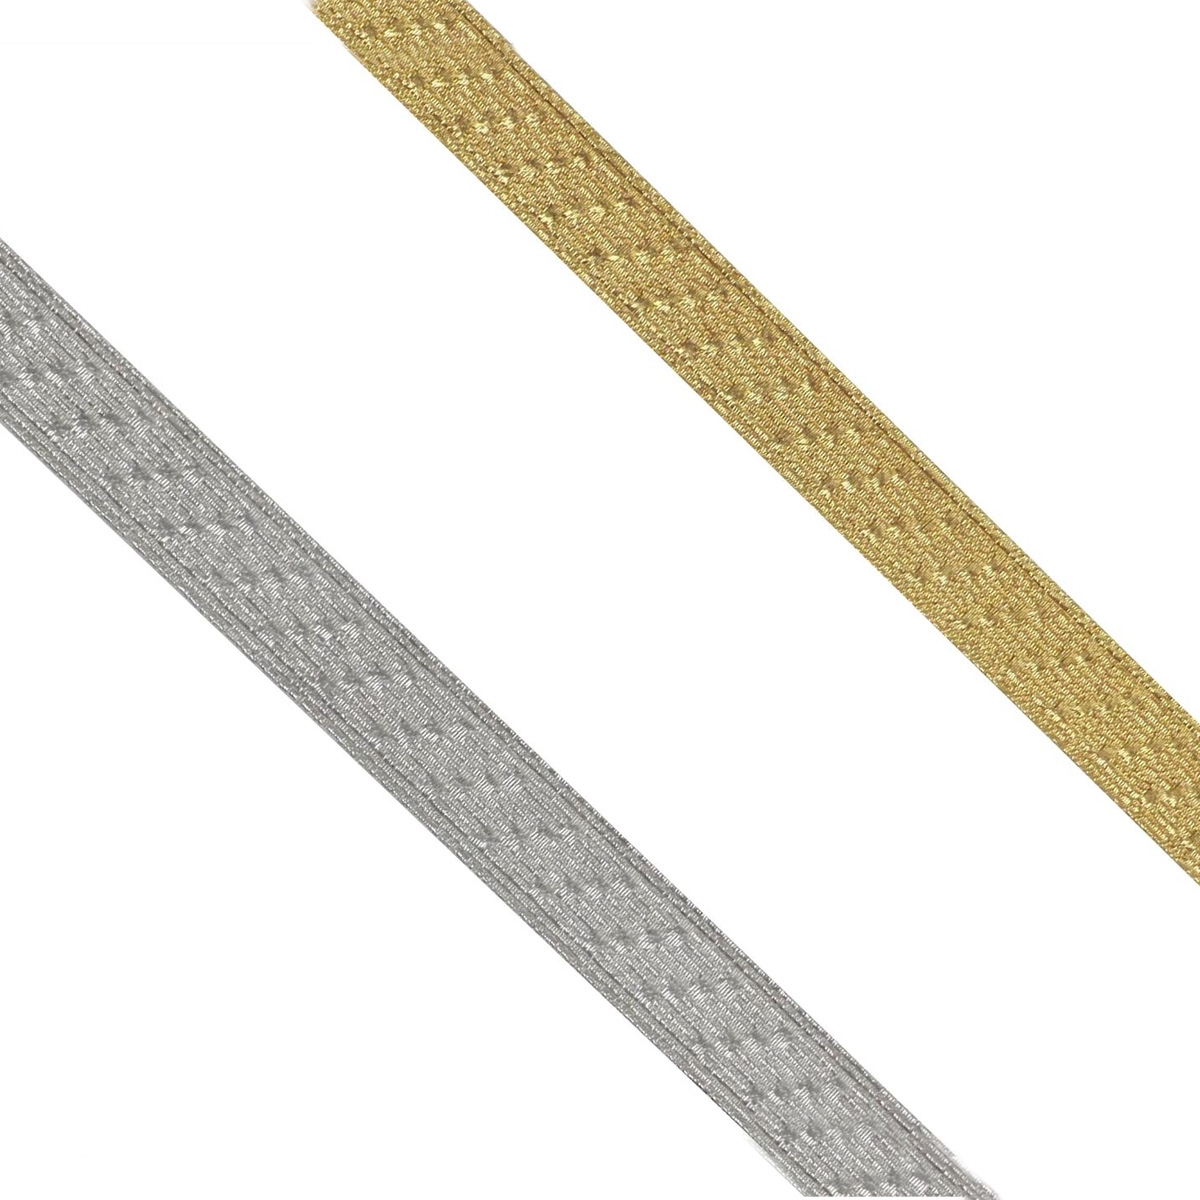 Braid silver and gold color , 13 mm large supplier very good quality